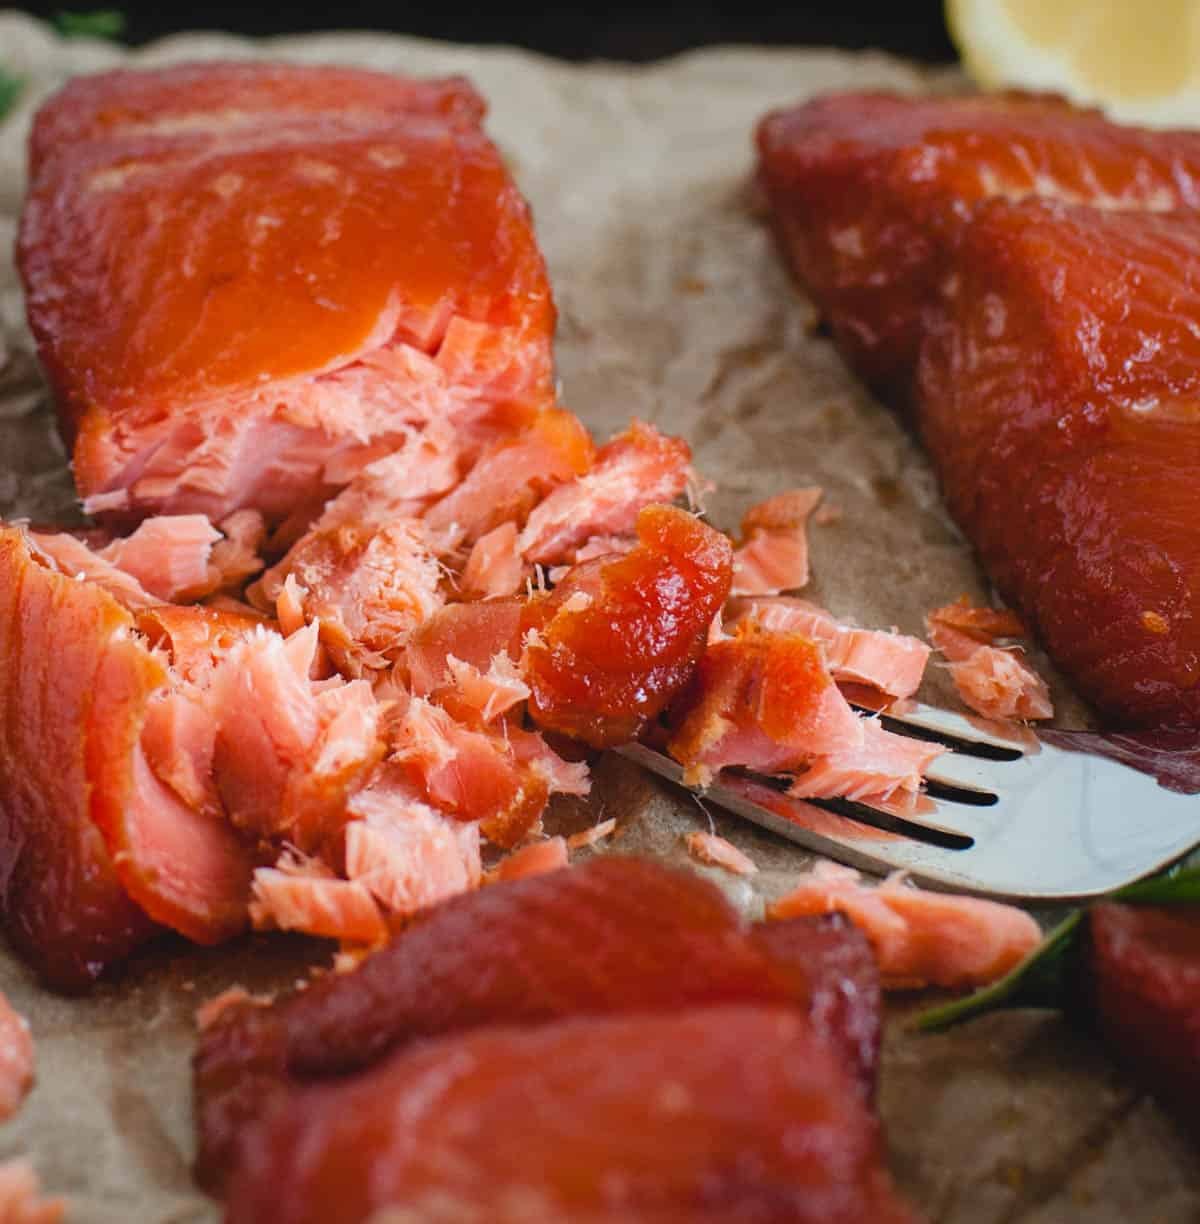 Angled shot of smoked salmon resting on a fork